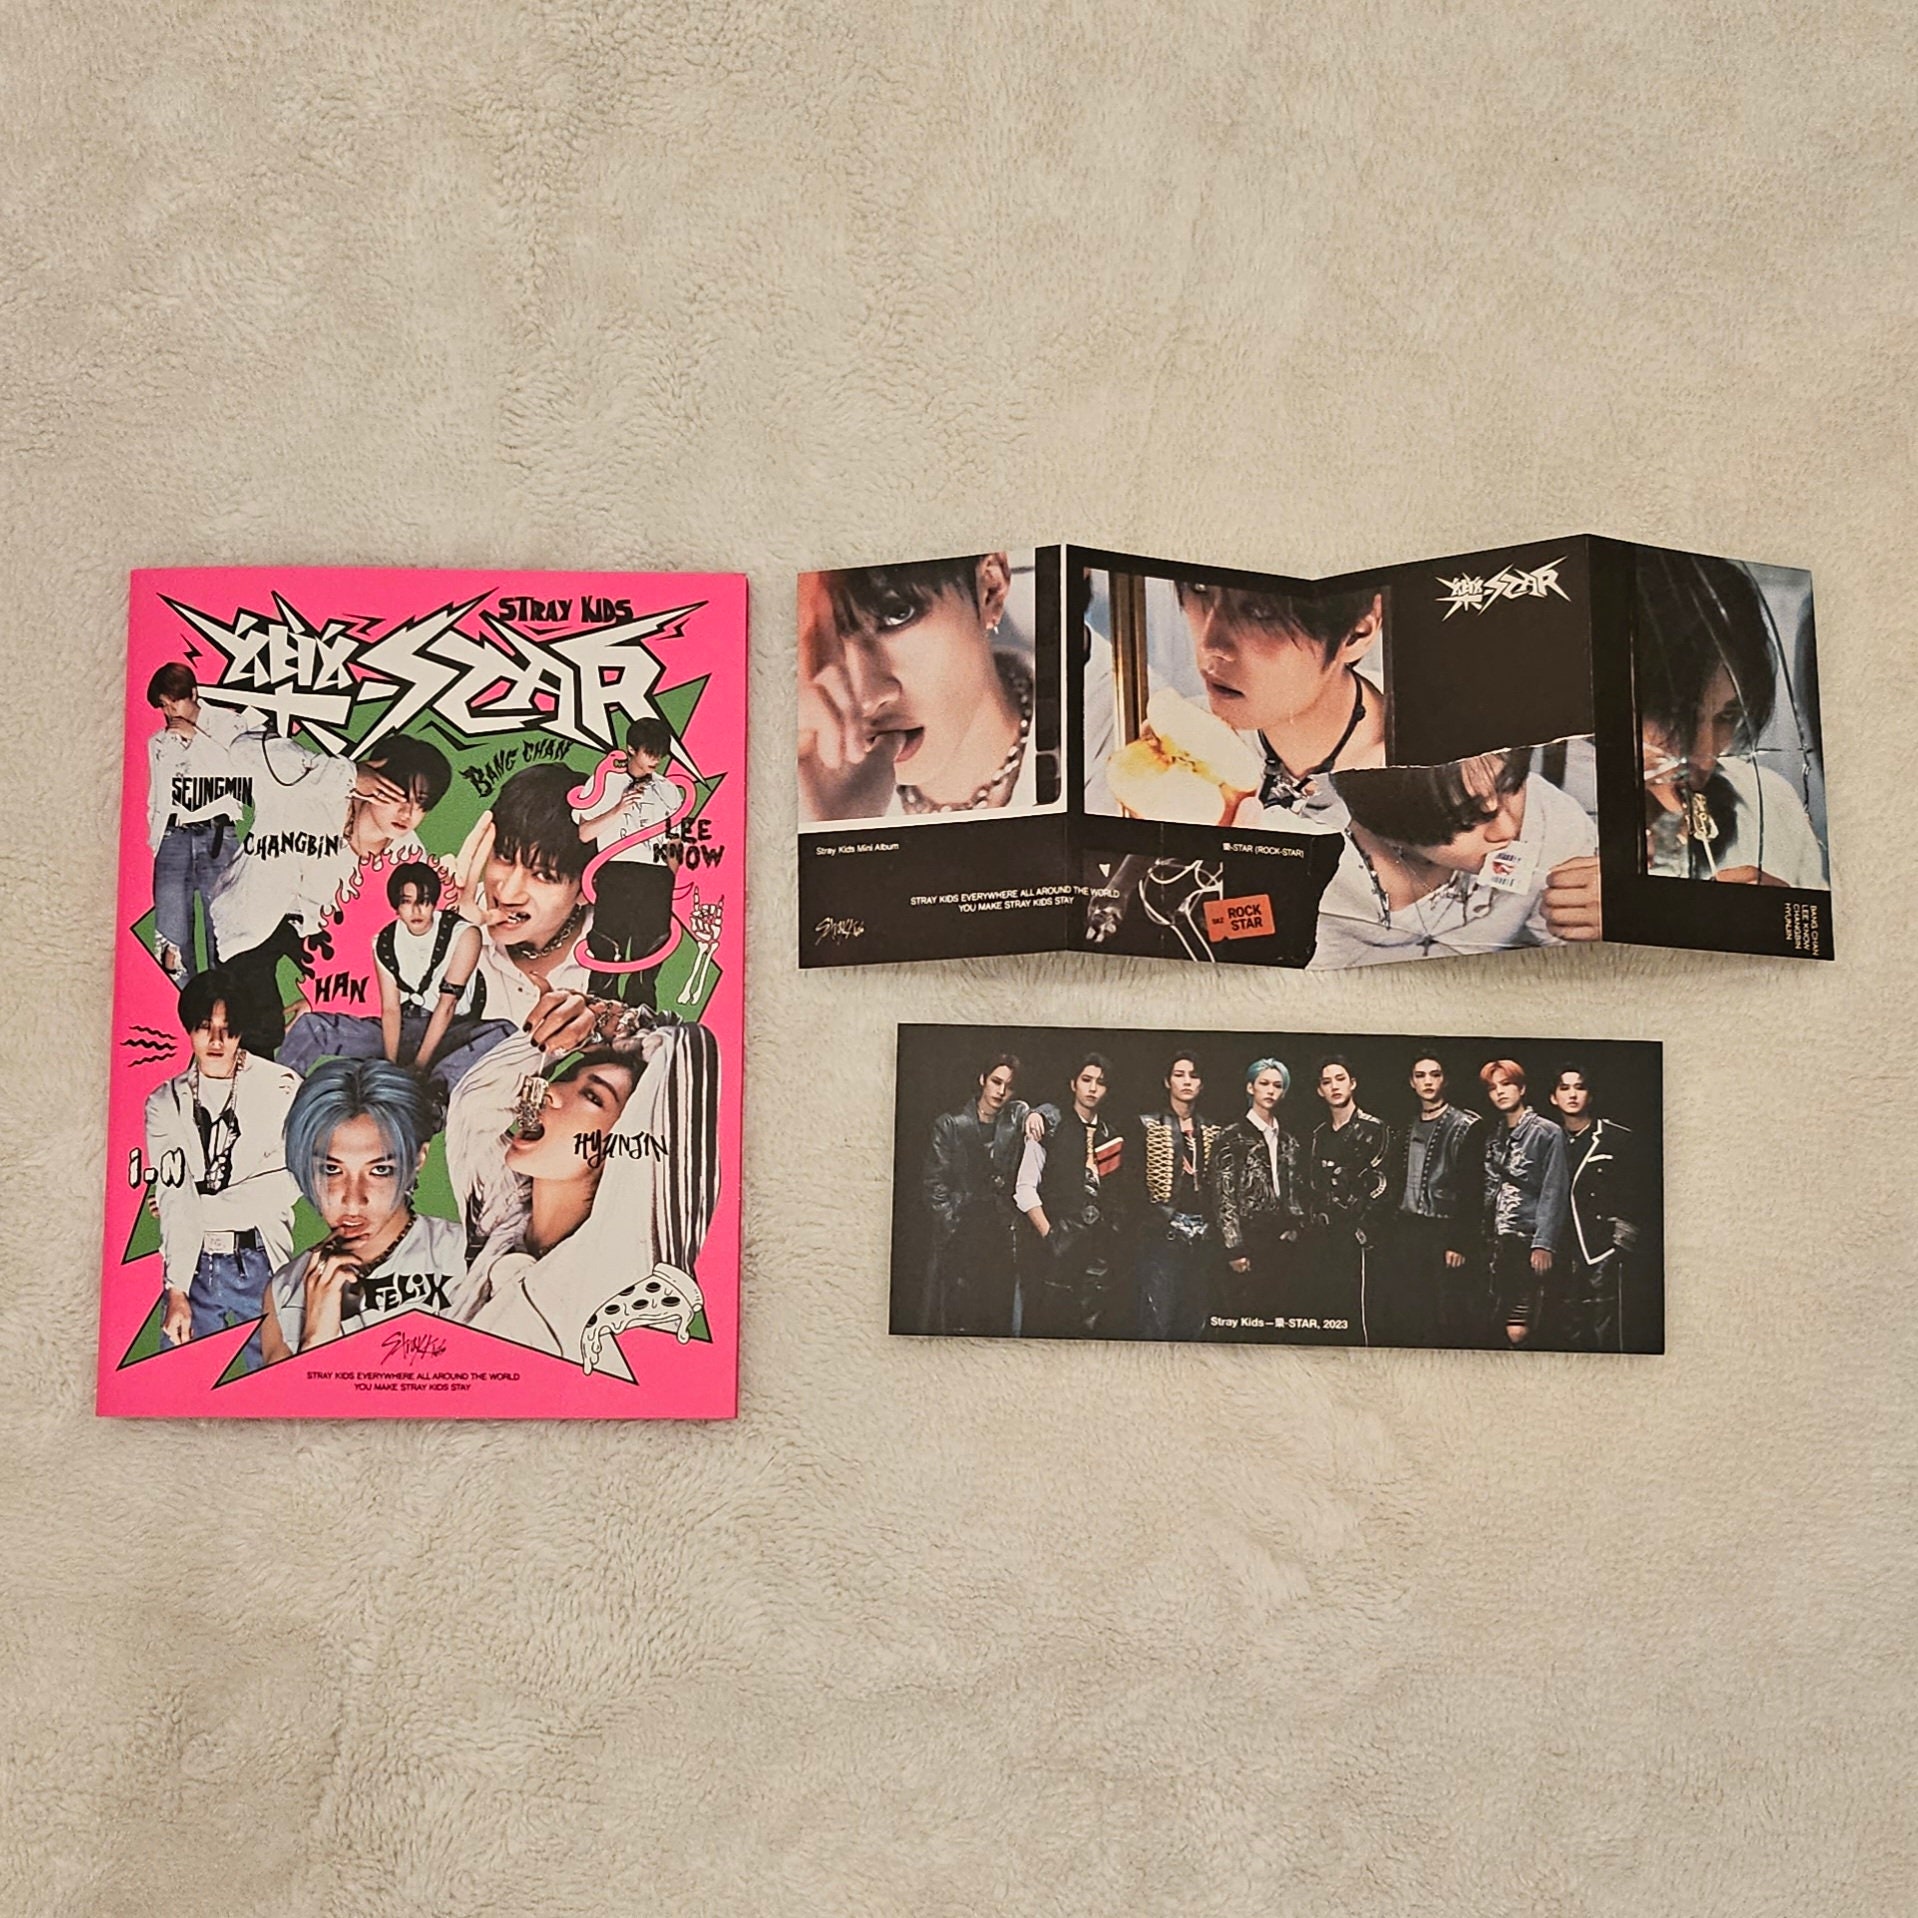 Stray Kids ROCK-STAR Unboxing Limited Star, Target Exclusive Rock, Roll, &  Felix Postcard Versions 